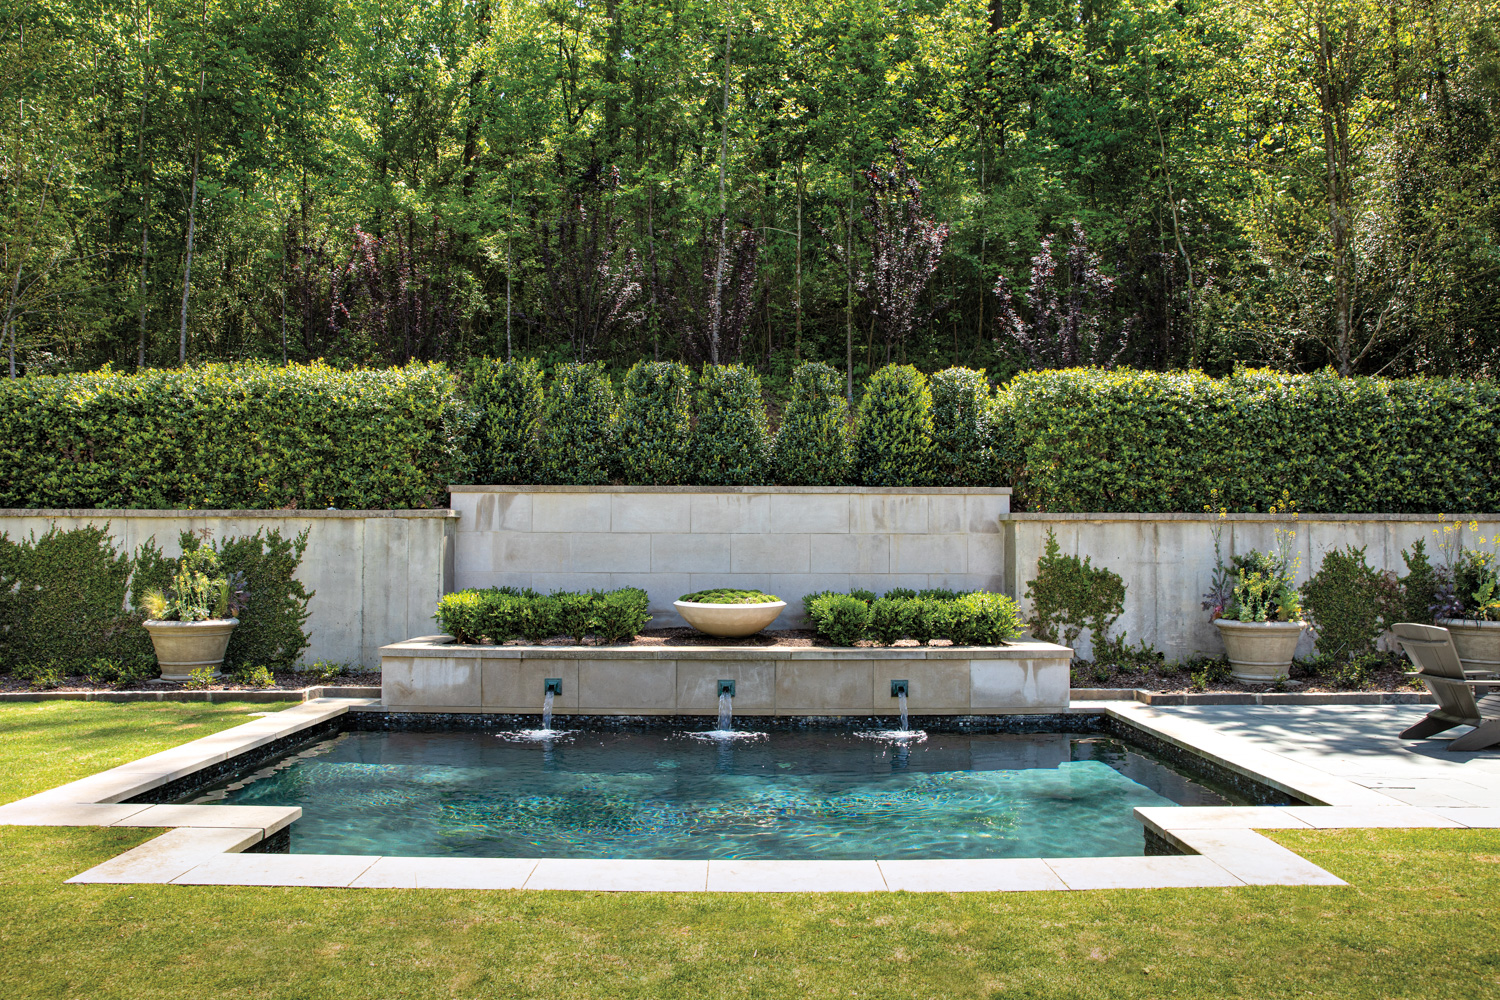 Swimming pool with fountain, trimmed grass lawn and boxwood border is the best garden inspiration